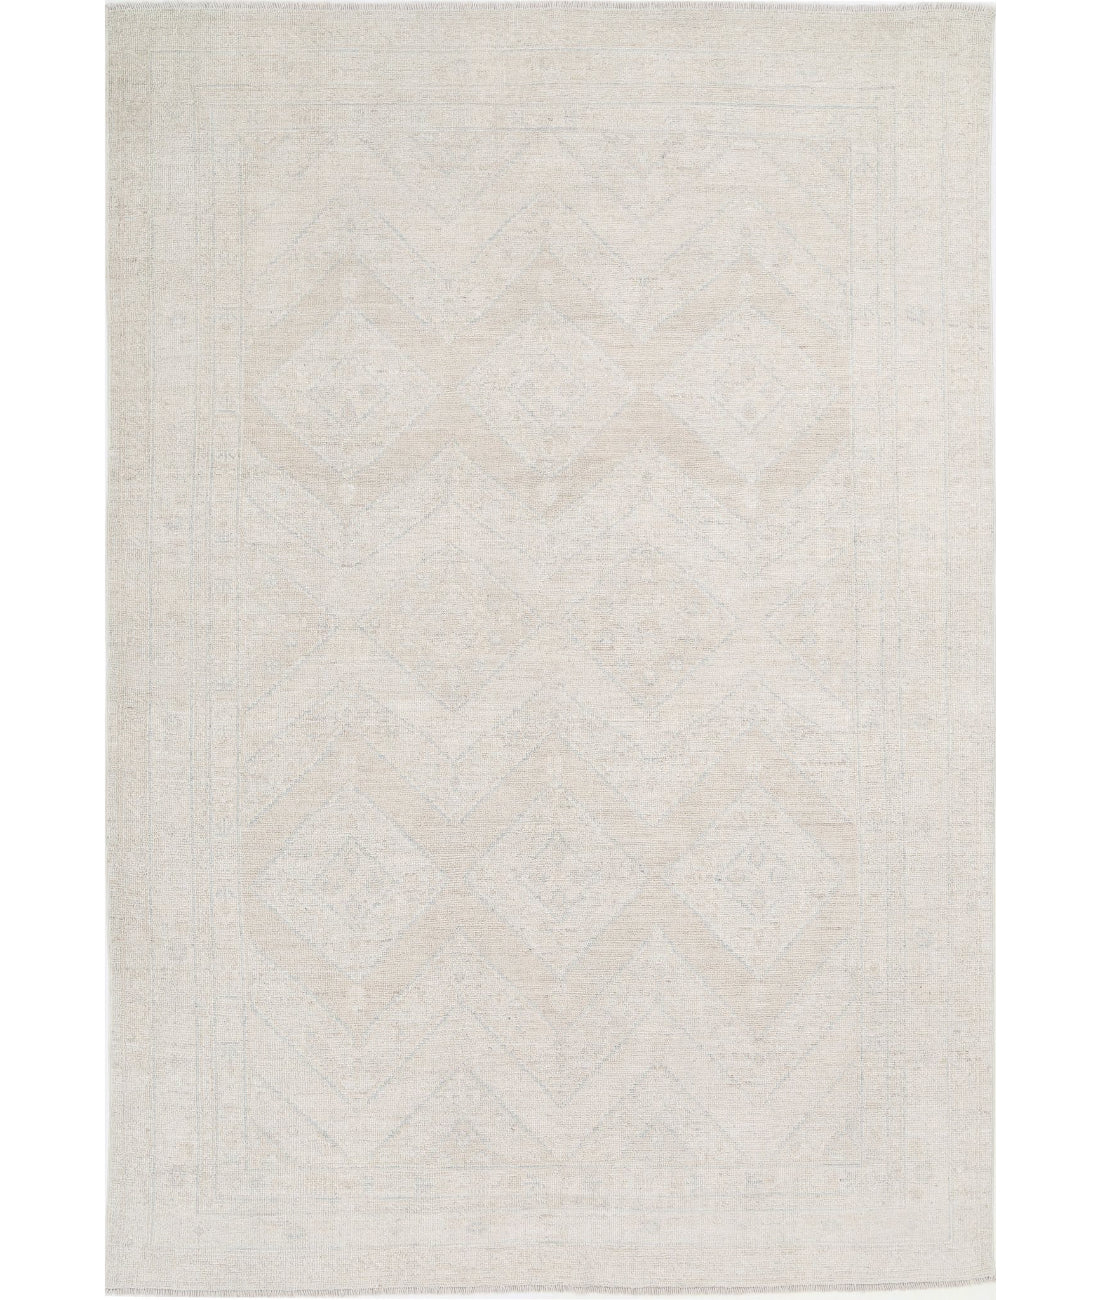 Hand Knotted Oushak Wool Rug - 6'3'' x 9'2'' 6'3'' x 9'2'' (188 X 275) / Ivory / Grey